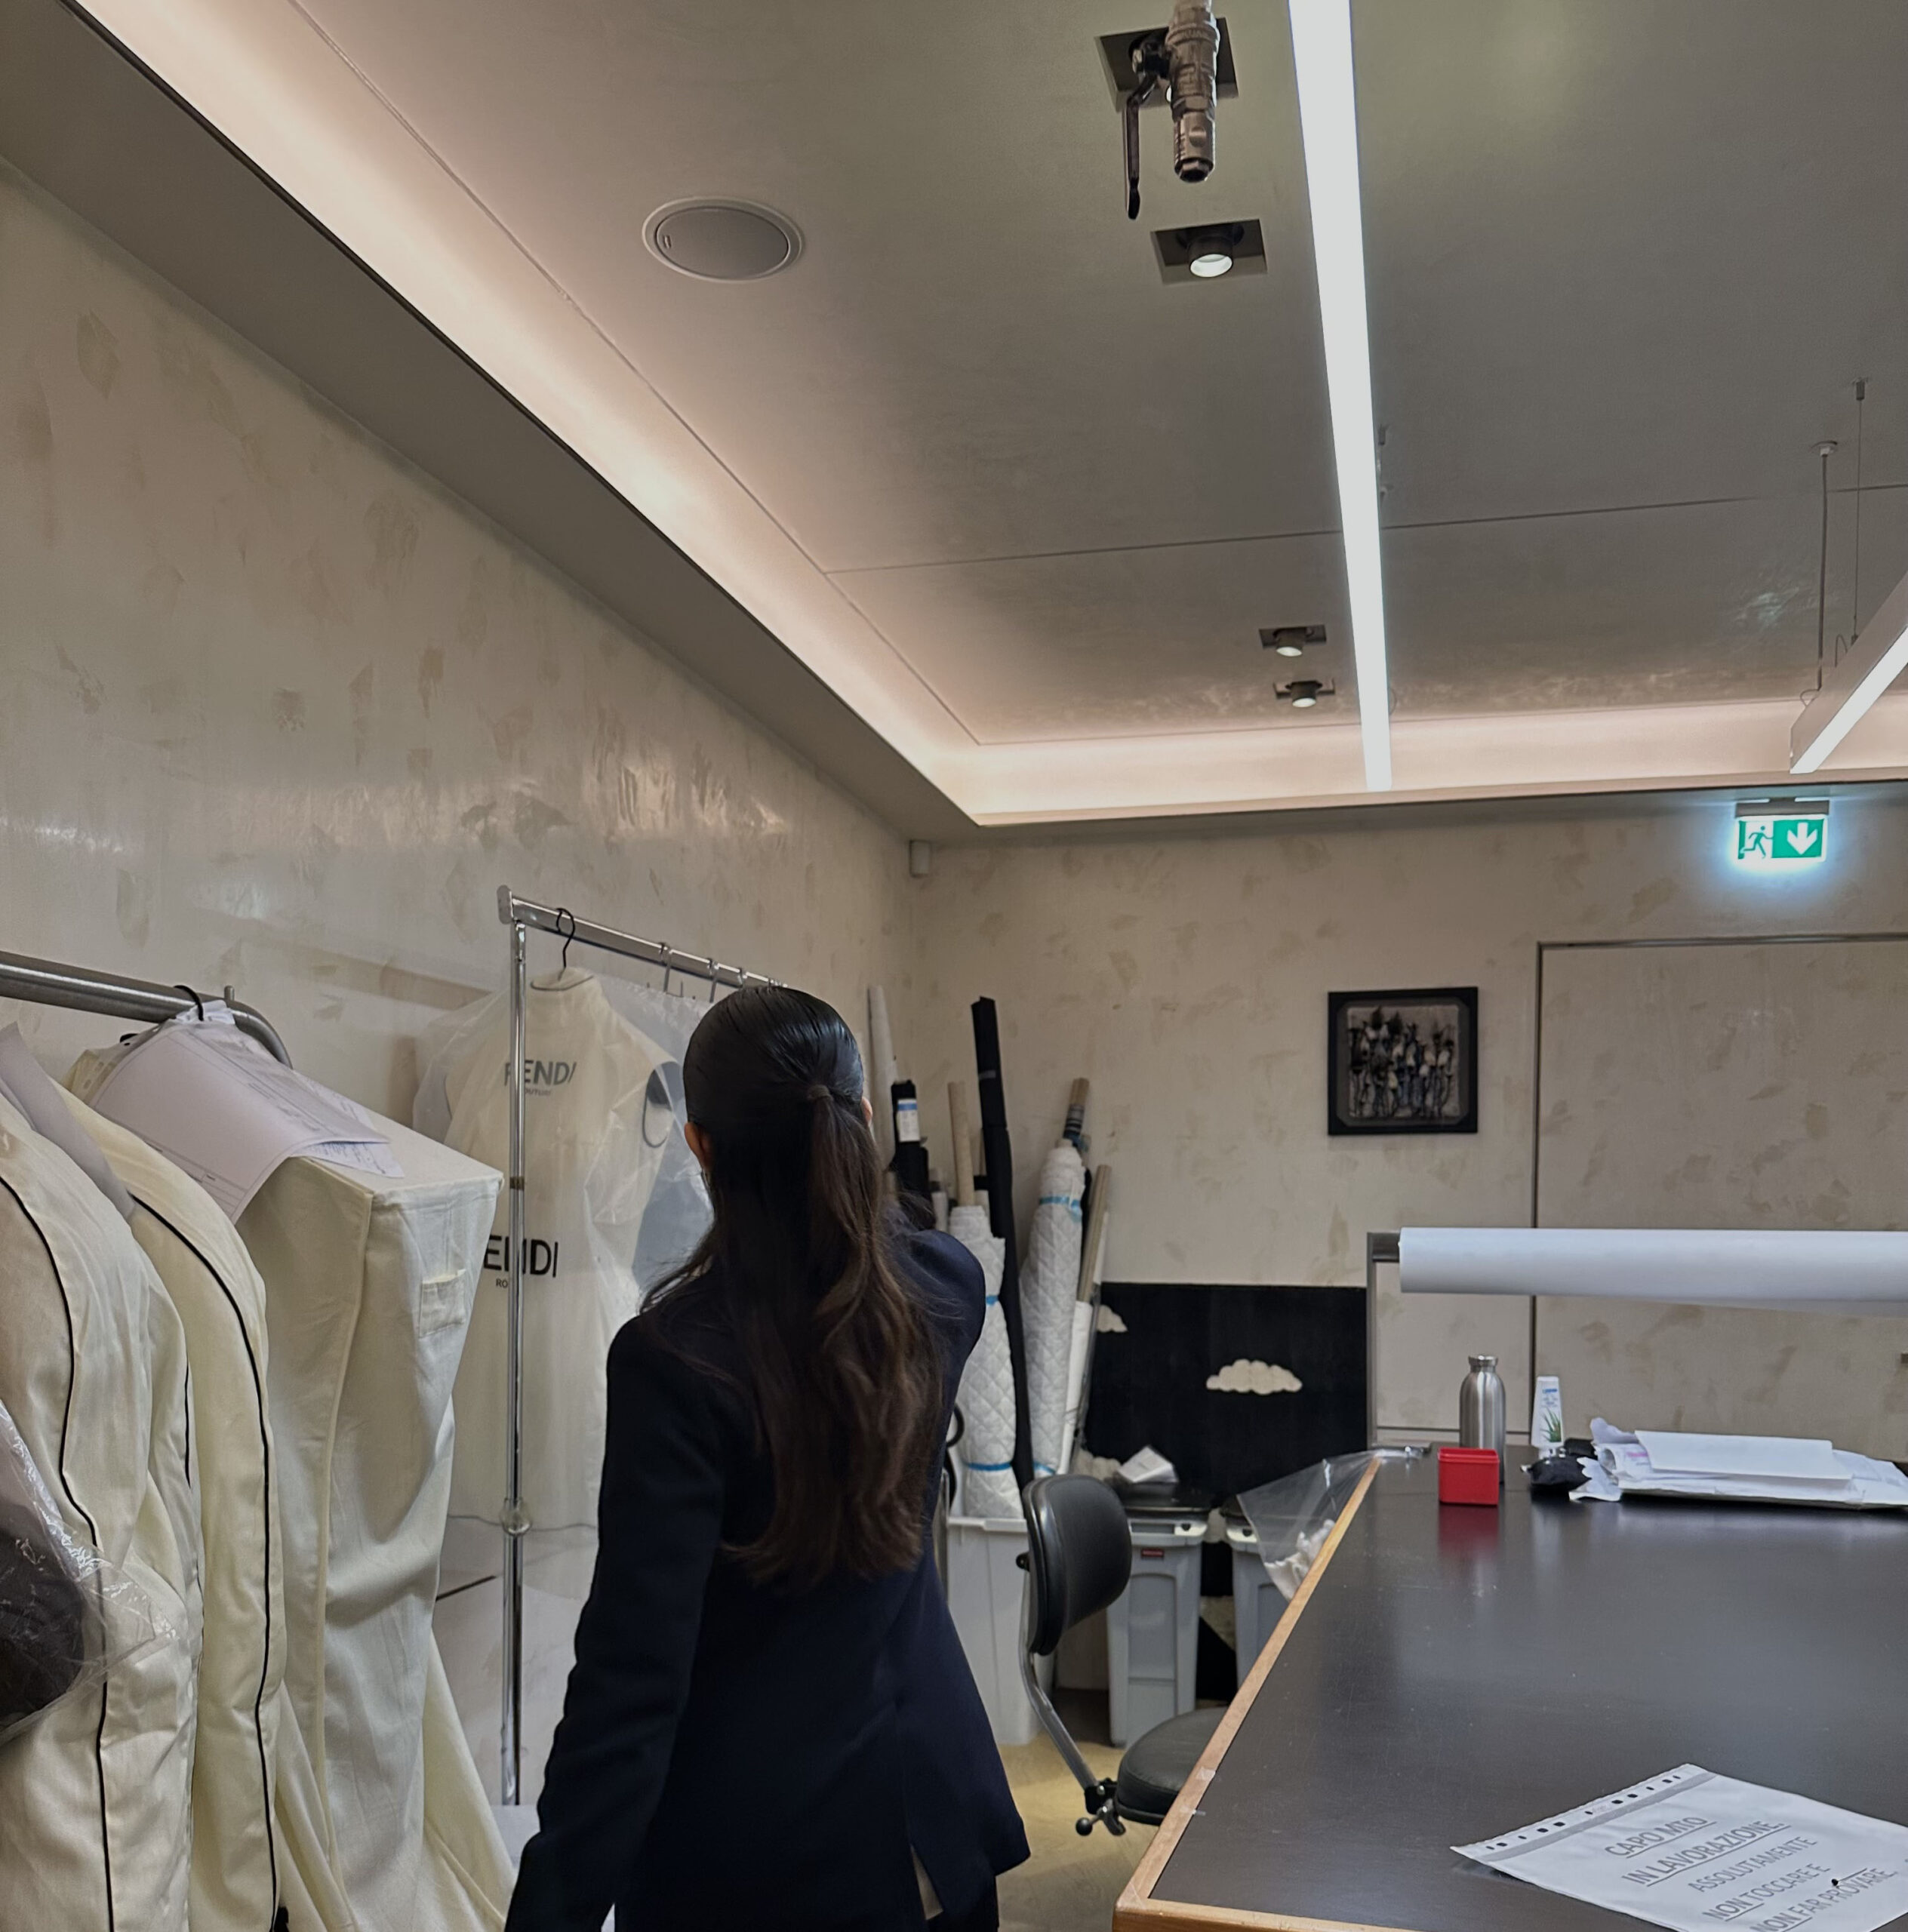 A fashion design student admiring garments during the trip to Italy